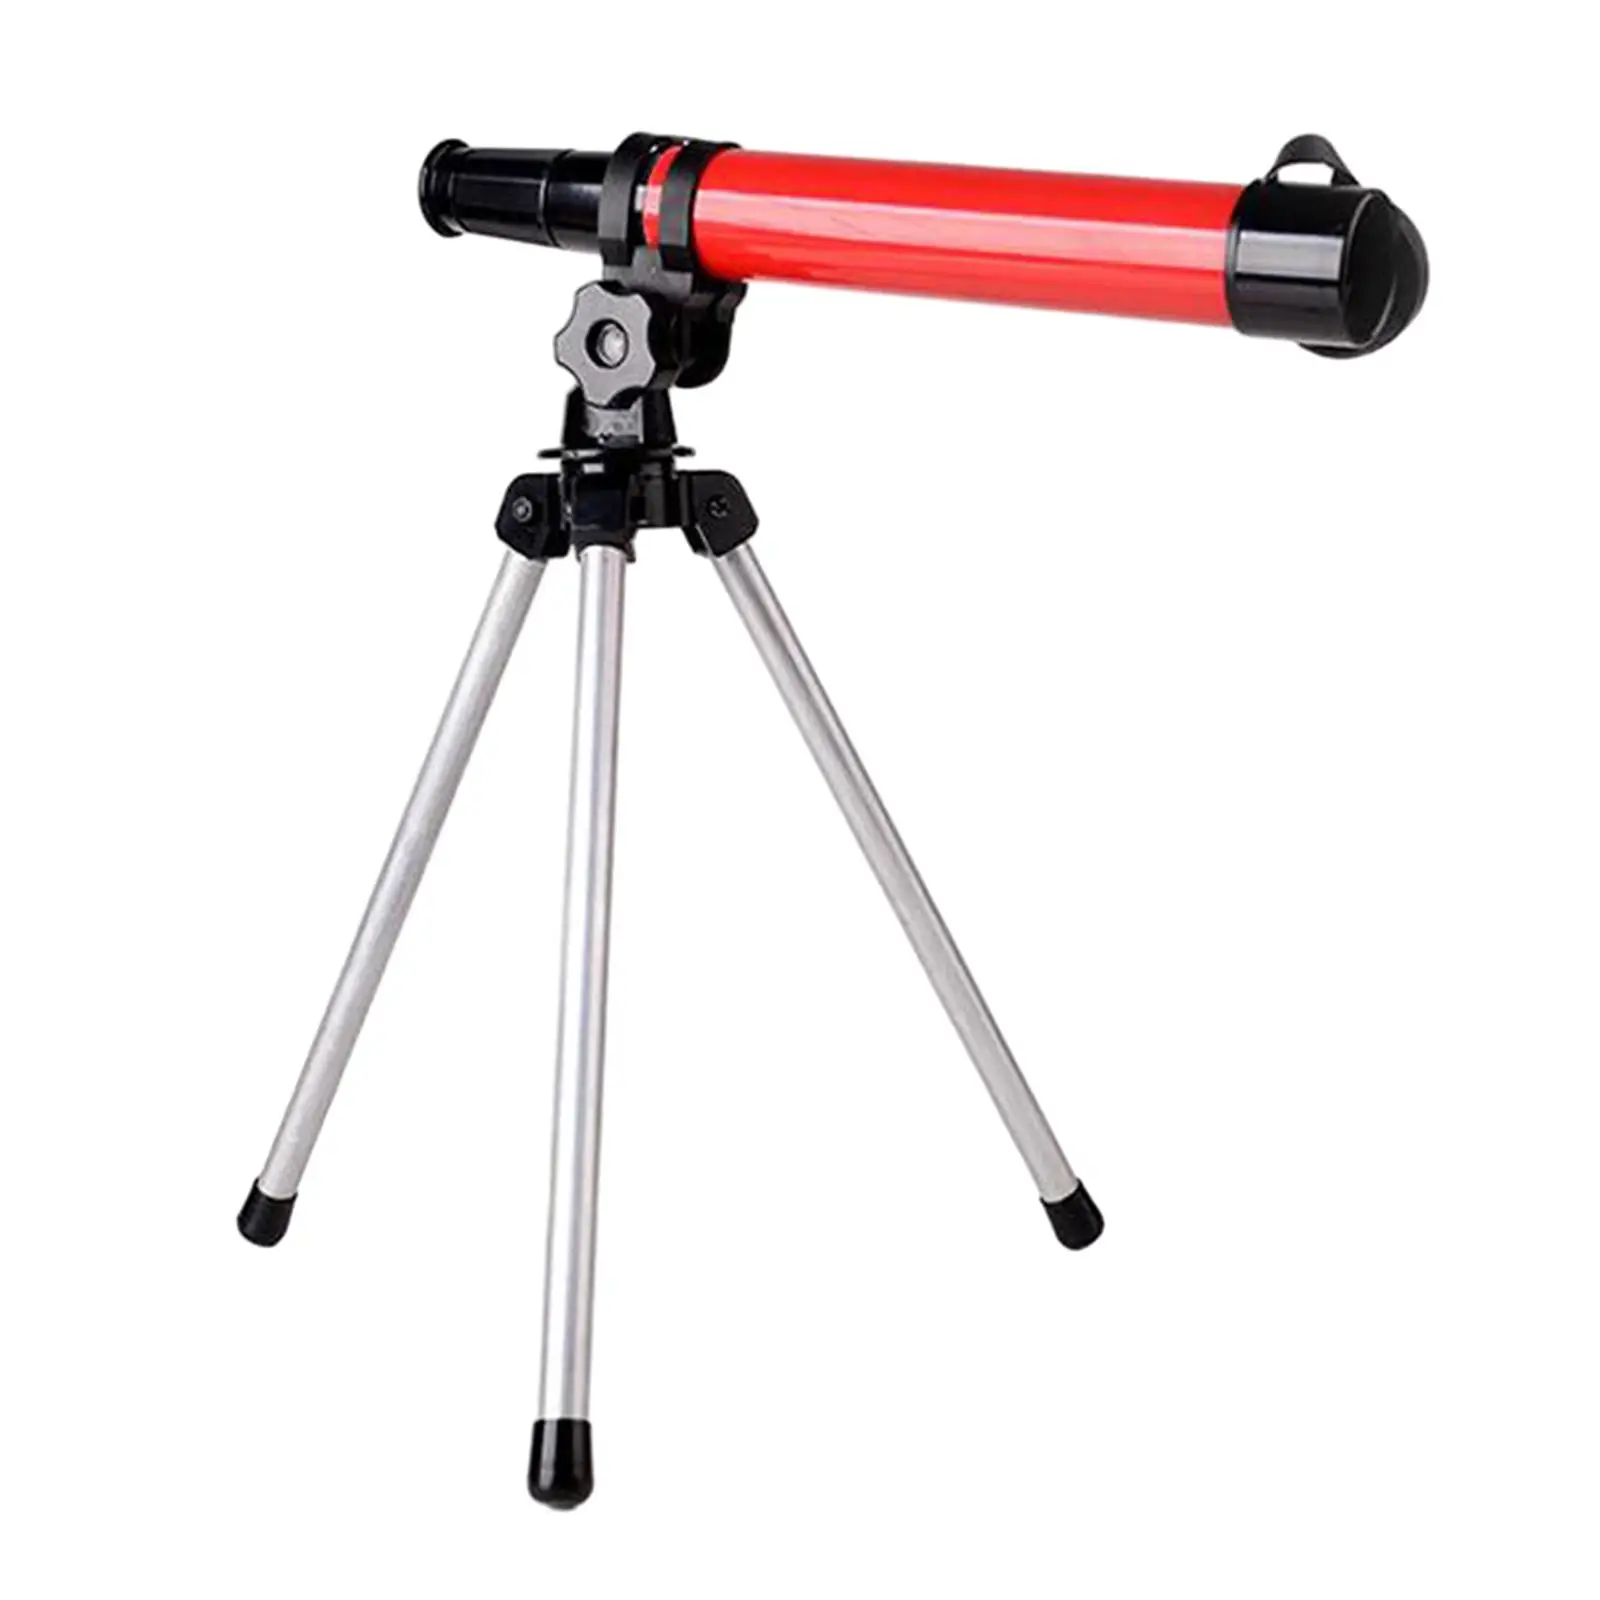 Single Telescope, Astronomical Telescope with Adjustable Tripod, Educational Science Toys for Hiking Beginners Concert